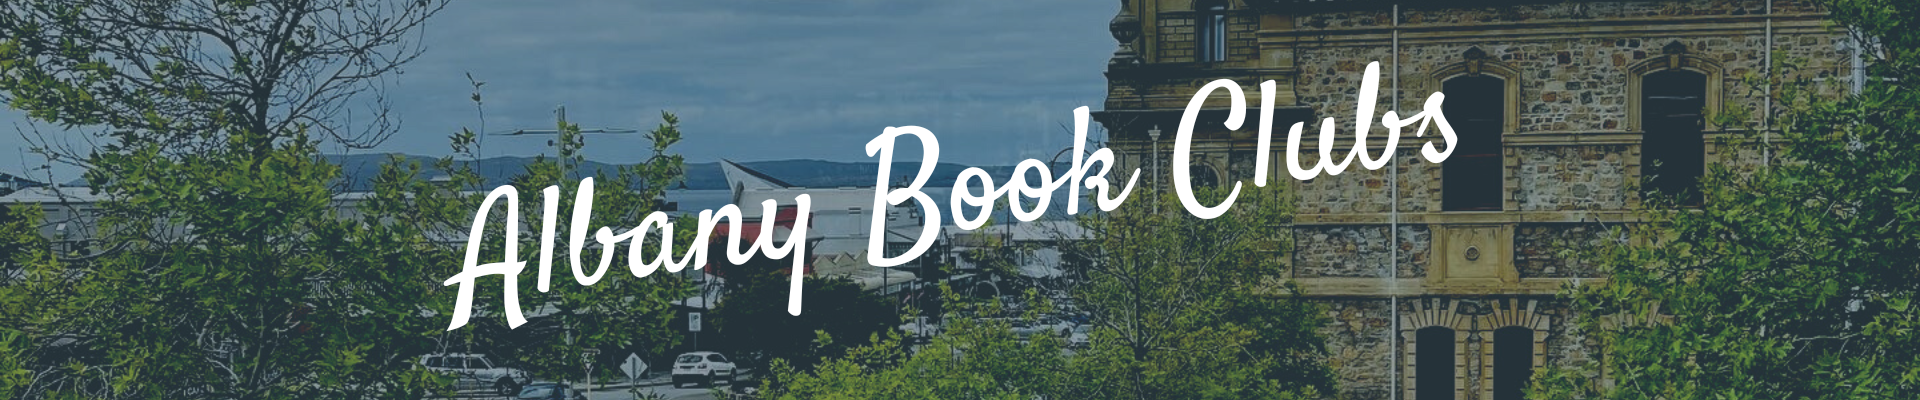 Albany Book Clubs banner, background image includes glimpses of Albany Town Hall and York Street to harbour